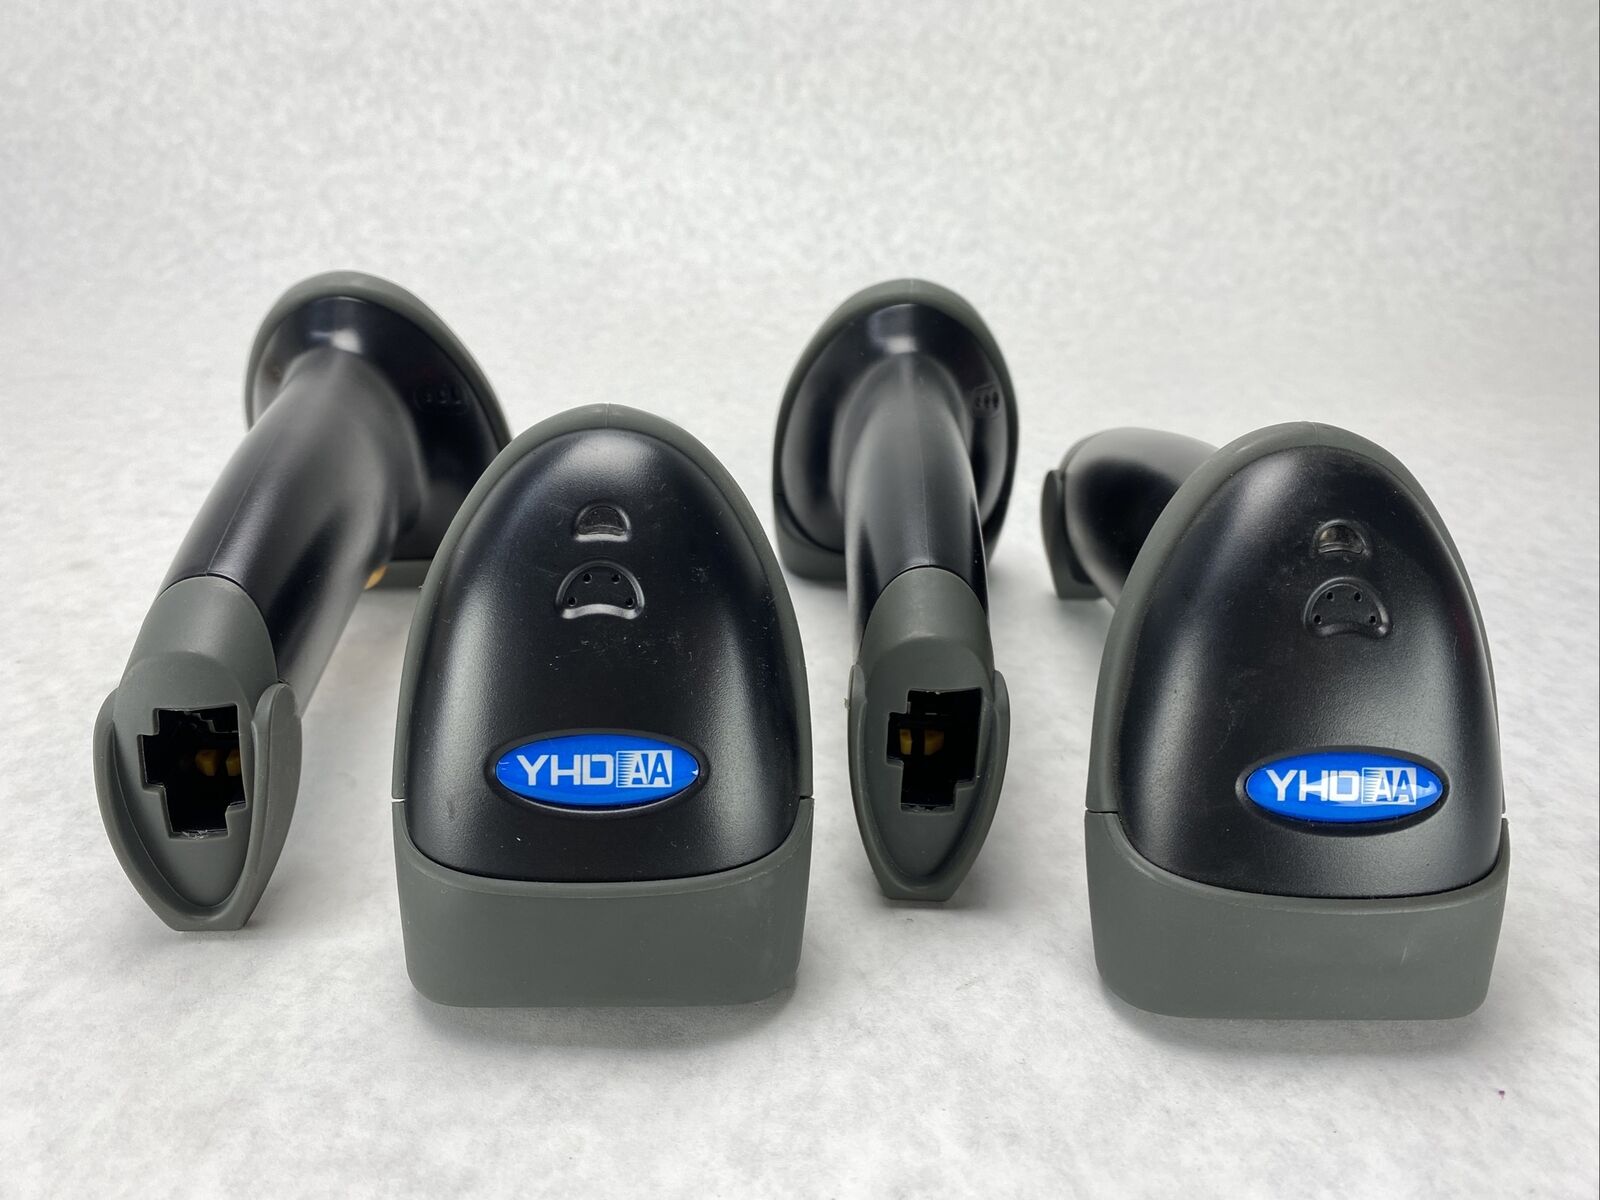 Lot( 4 ) YHD-5100G Handheld Wired USB Automatic Barcode Scanner Black NO CABLE